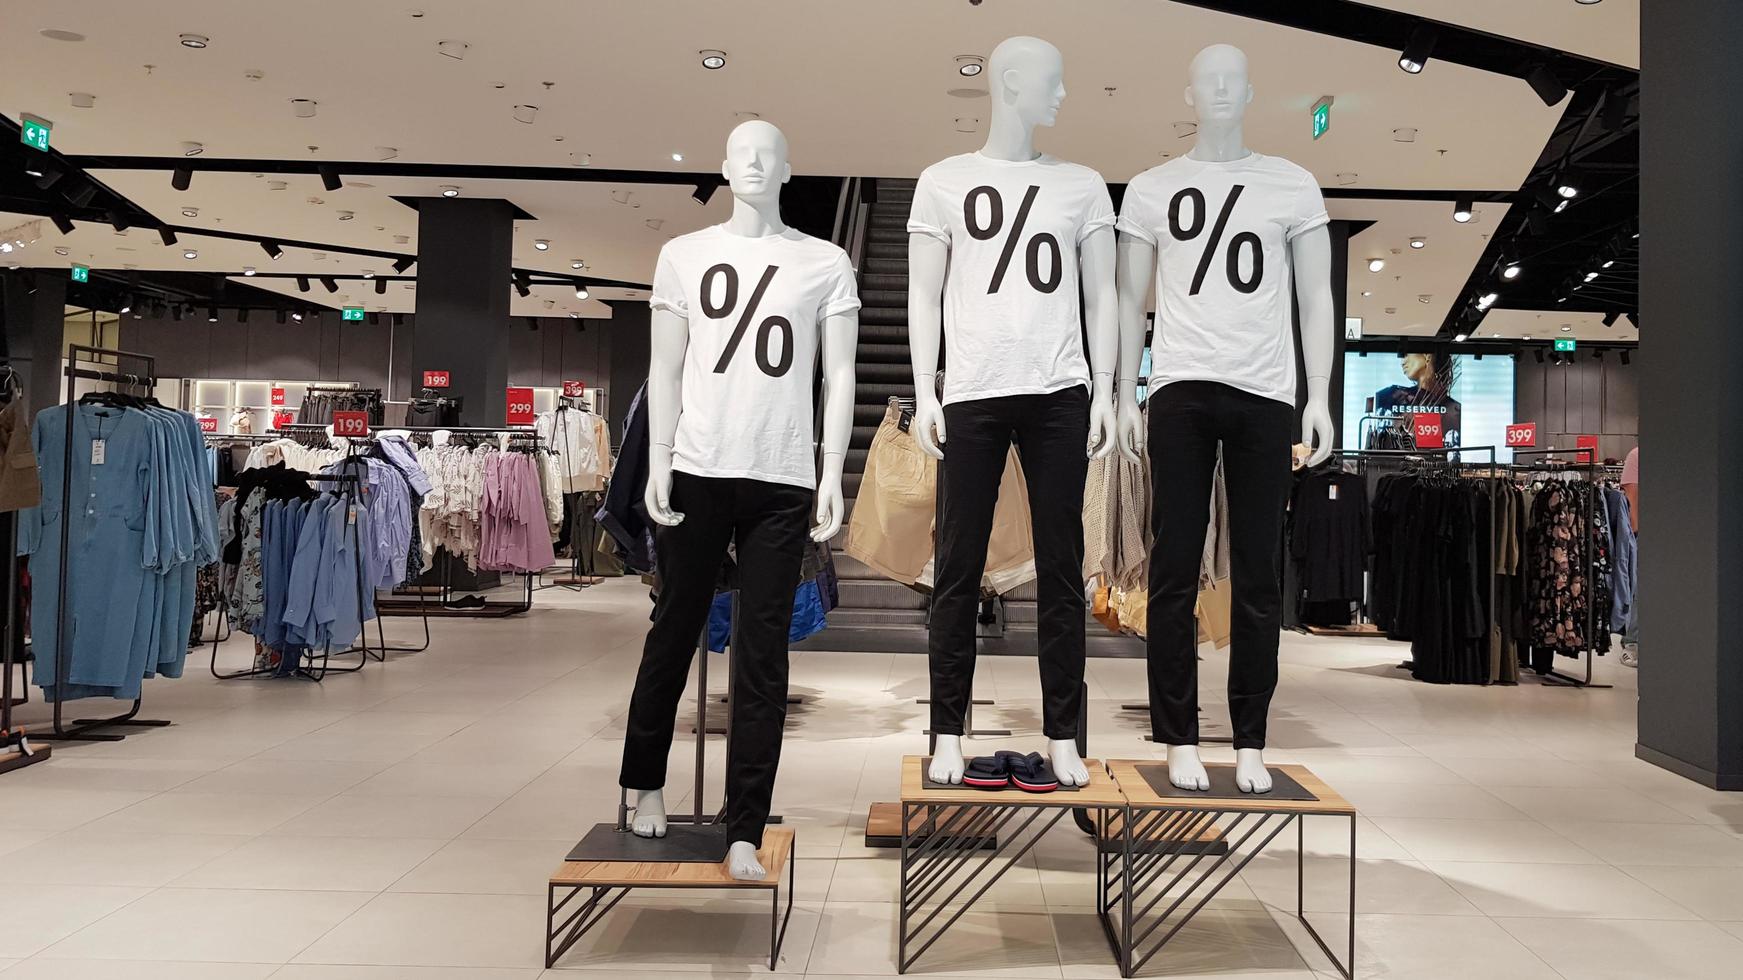 Mannequins wearing white T-shirts with a percent sale sign in a shopping mall Promotion, advertising, shopping and black friday concept. Ukraine, Kiev - September 1, 2020 photo